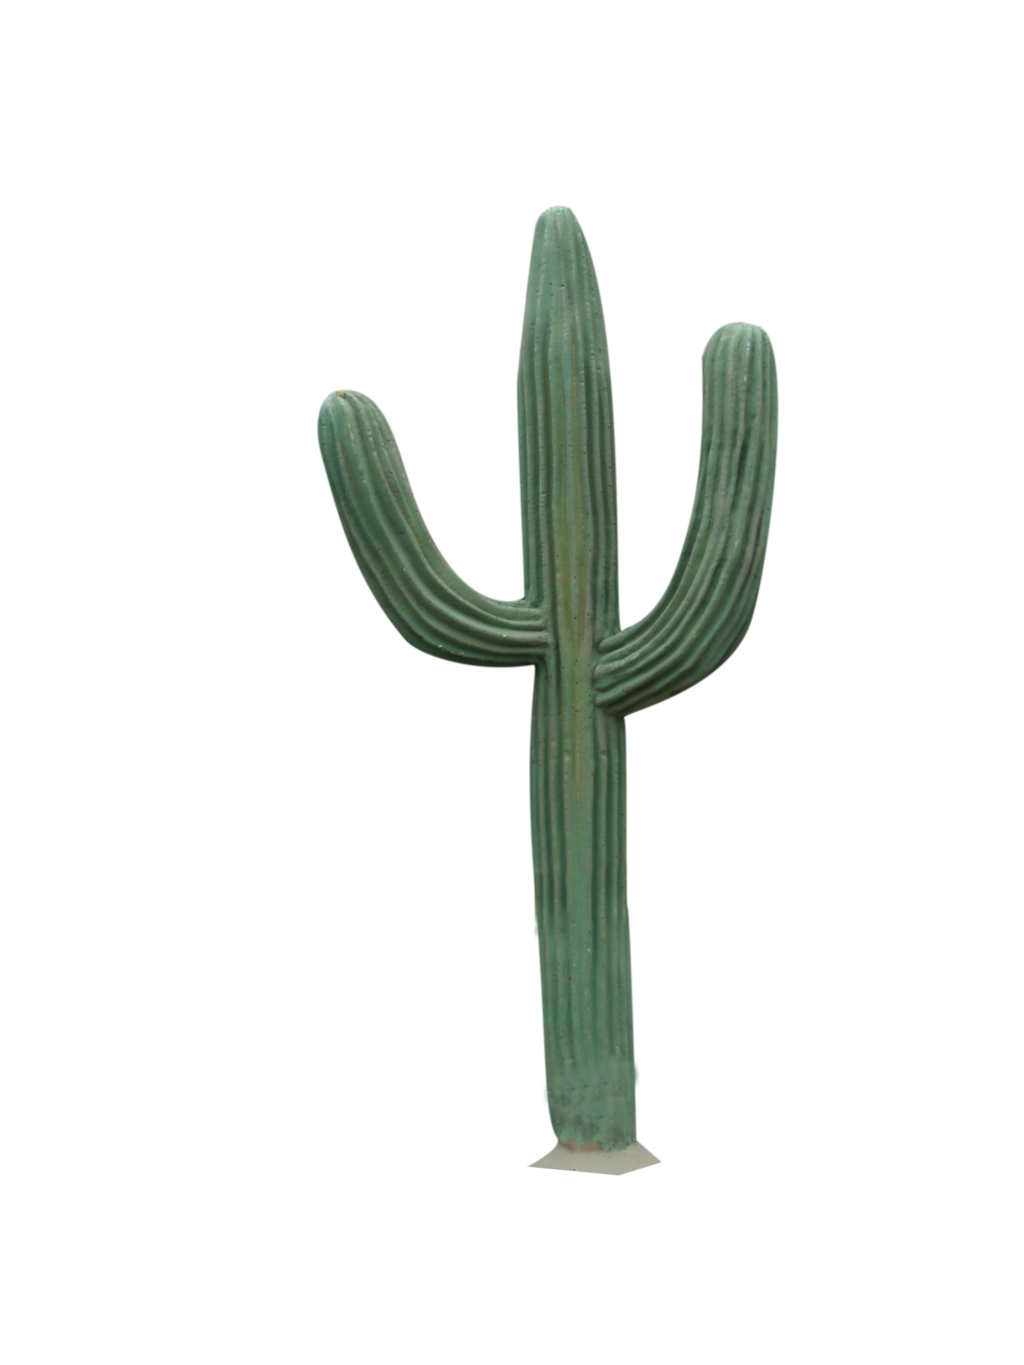 cactus - Google Search - Cact